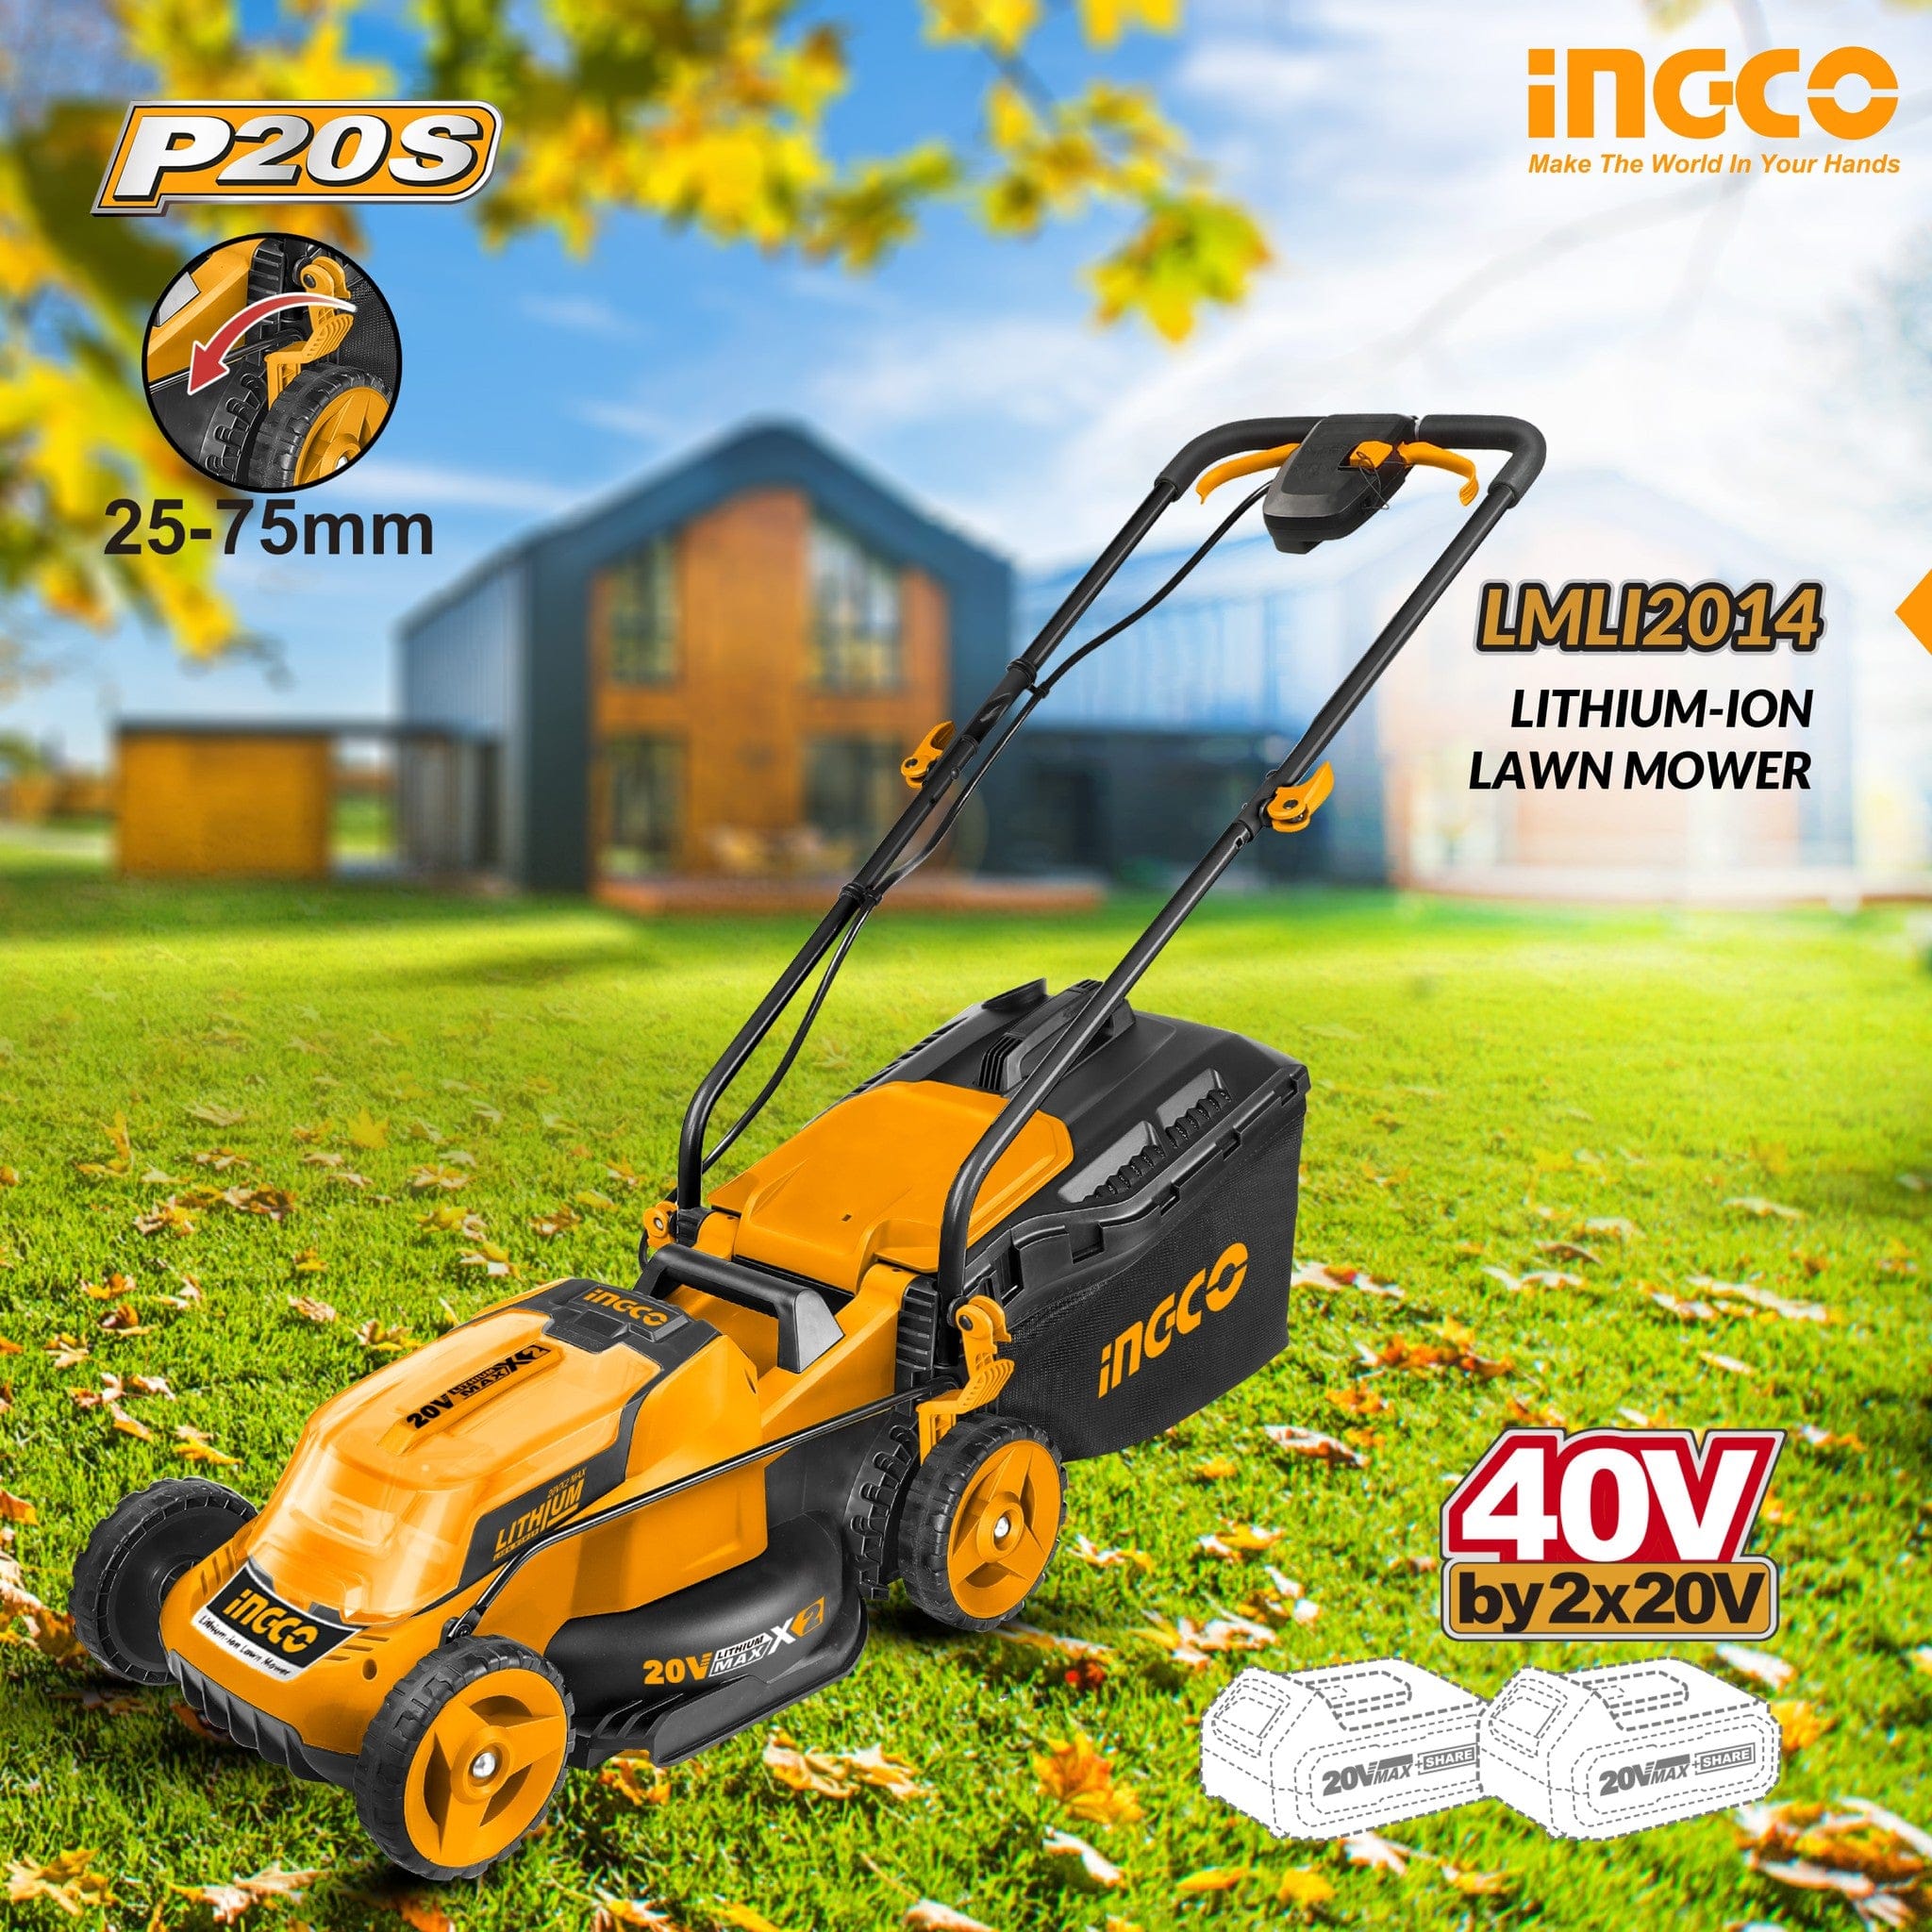 Ingco 14" Lithium-ion Lawn Mower 40V - LMLI2014 | Supply Master | Accra, Ghana Lawn Mower Buy Tools hardware Building materials